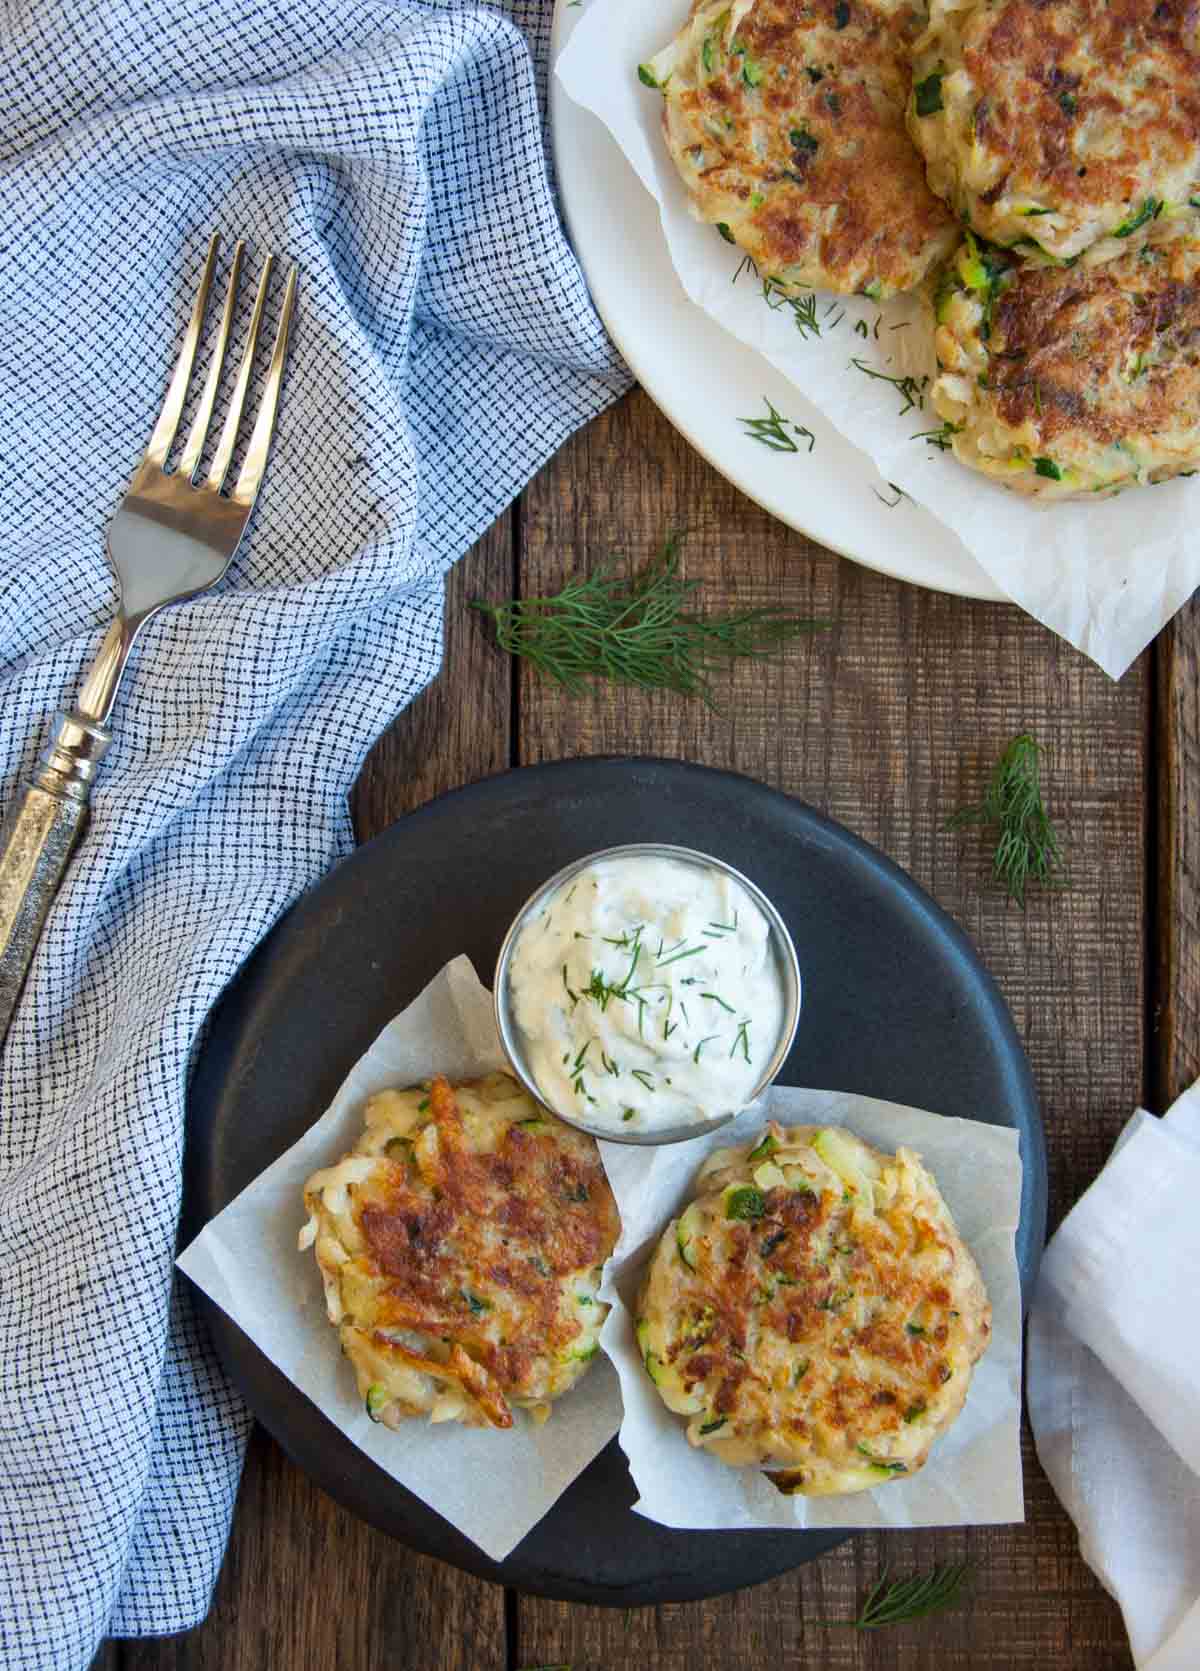 Crispy on the outside and soft on the inside, these zucchini cakes are a tasty way to use that garden produce. The tangy yogurt dill dipping sauce makes these a perfect appetizer.